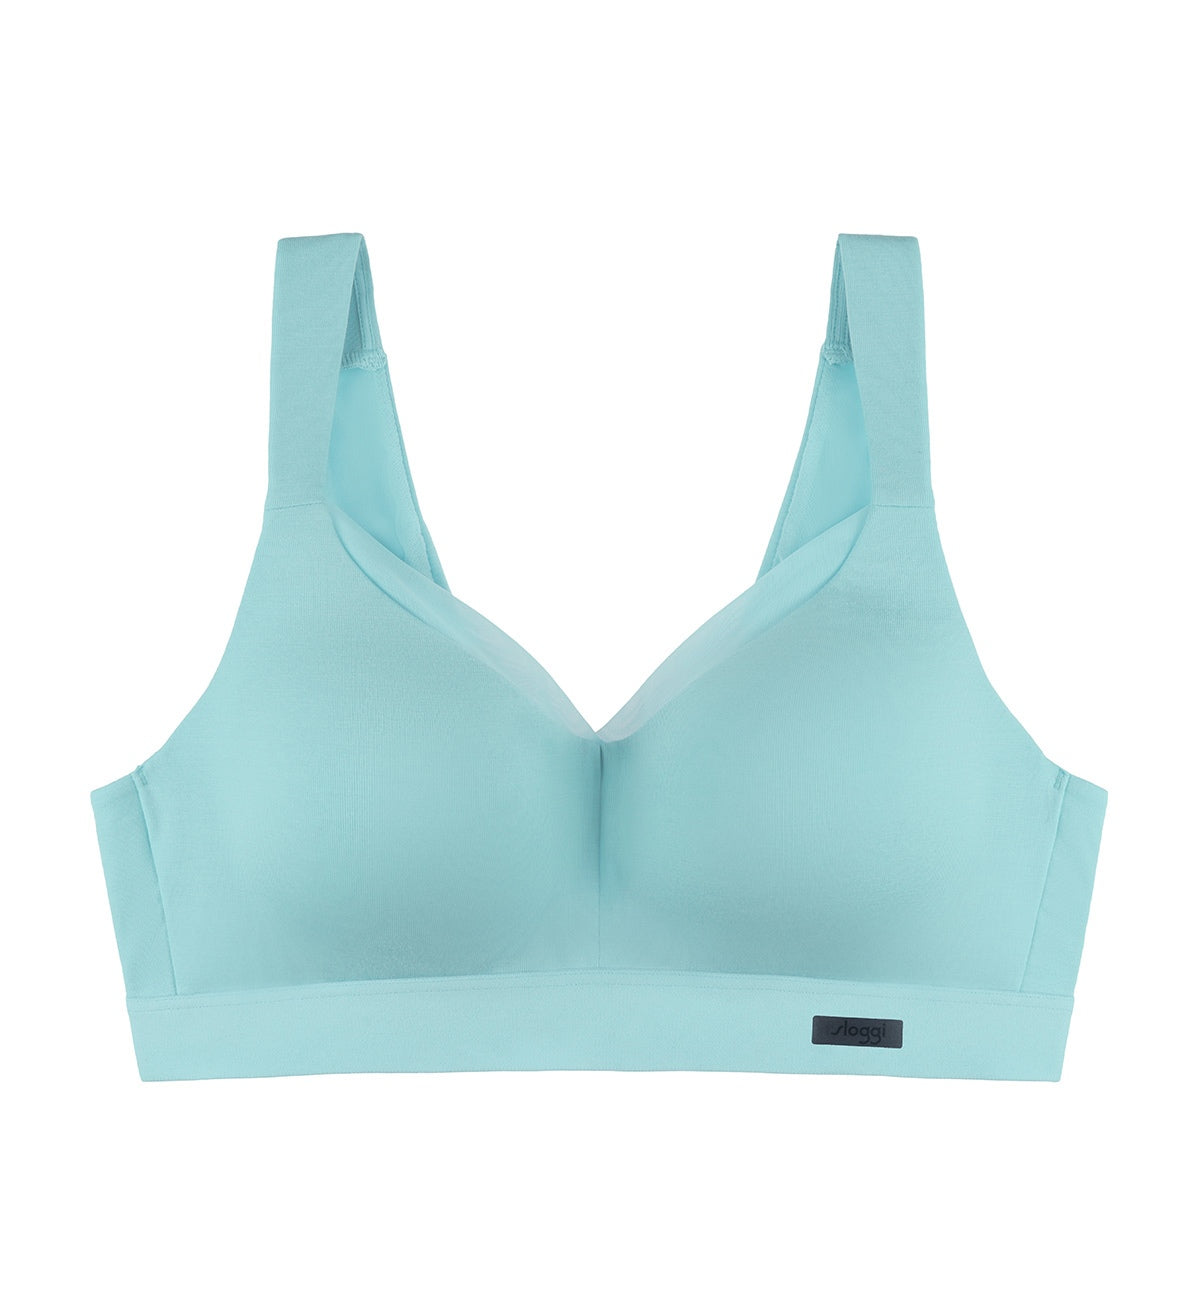 Pack of 2 double comfort sports bras in cotton Sloggi